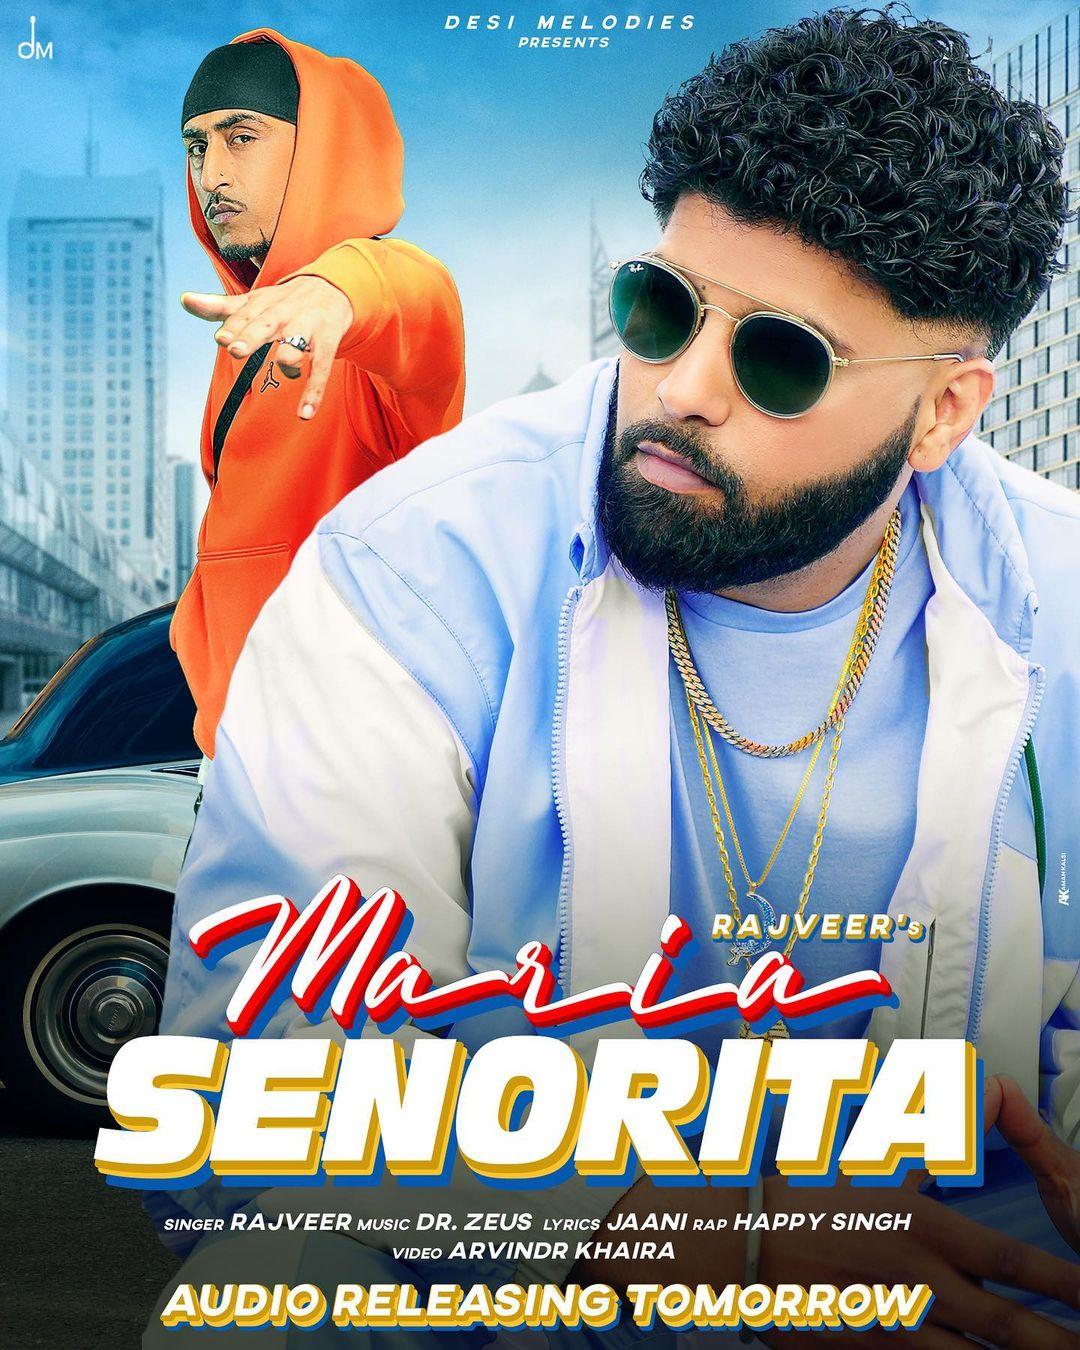 class="content__text"
 @rajveerofficial Brother is back..!!! #mariasenorita is releasing tomorrow..!! Give your love and support..!!! 🔥✨
@jaani777 @arvindrkhaira @drzeusworld @happysinghmusic @desimelodies 
 